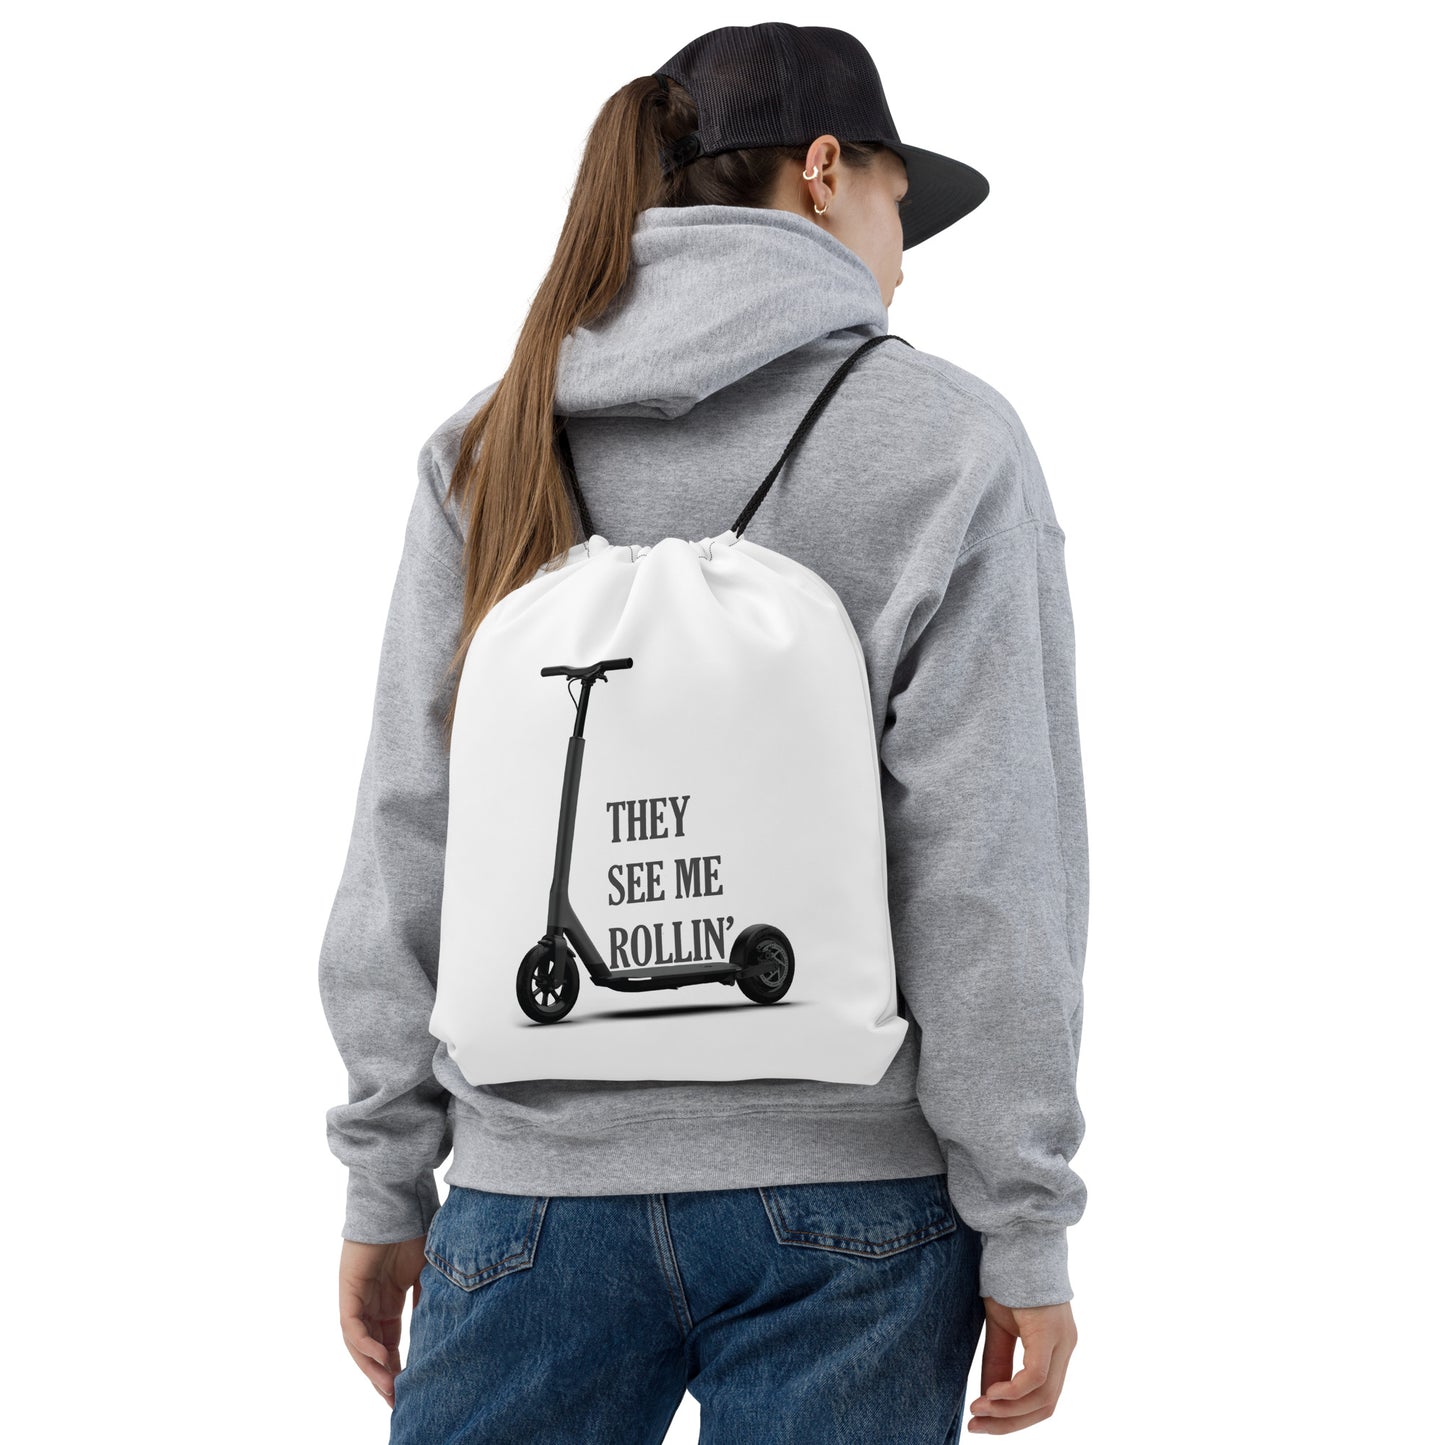 They See Me Rollin' Drawstring Bag